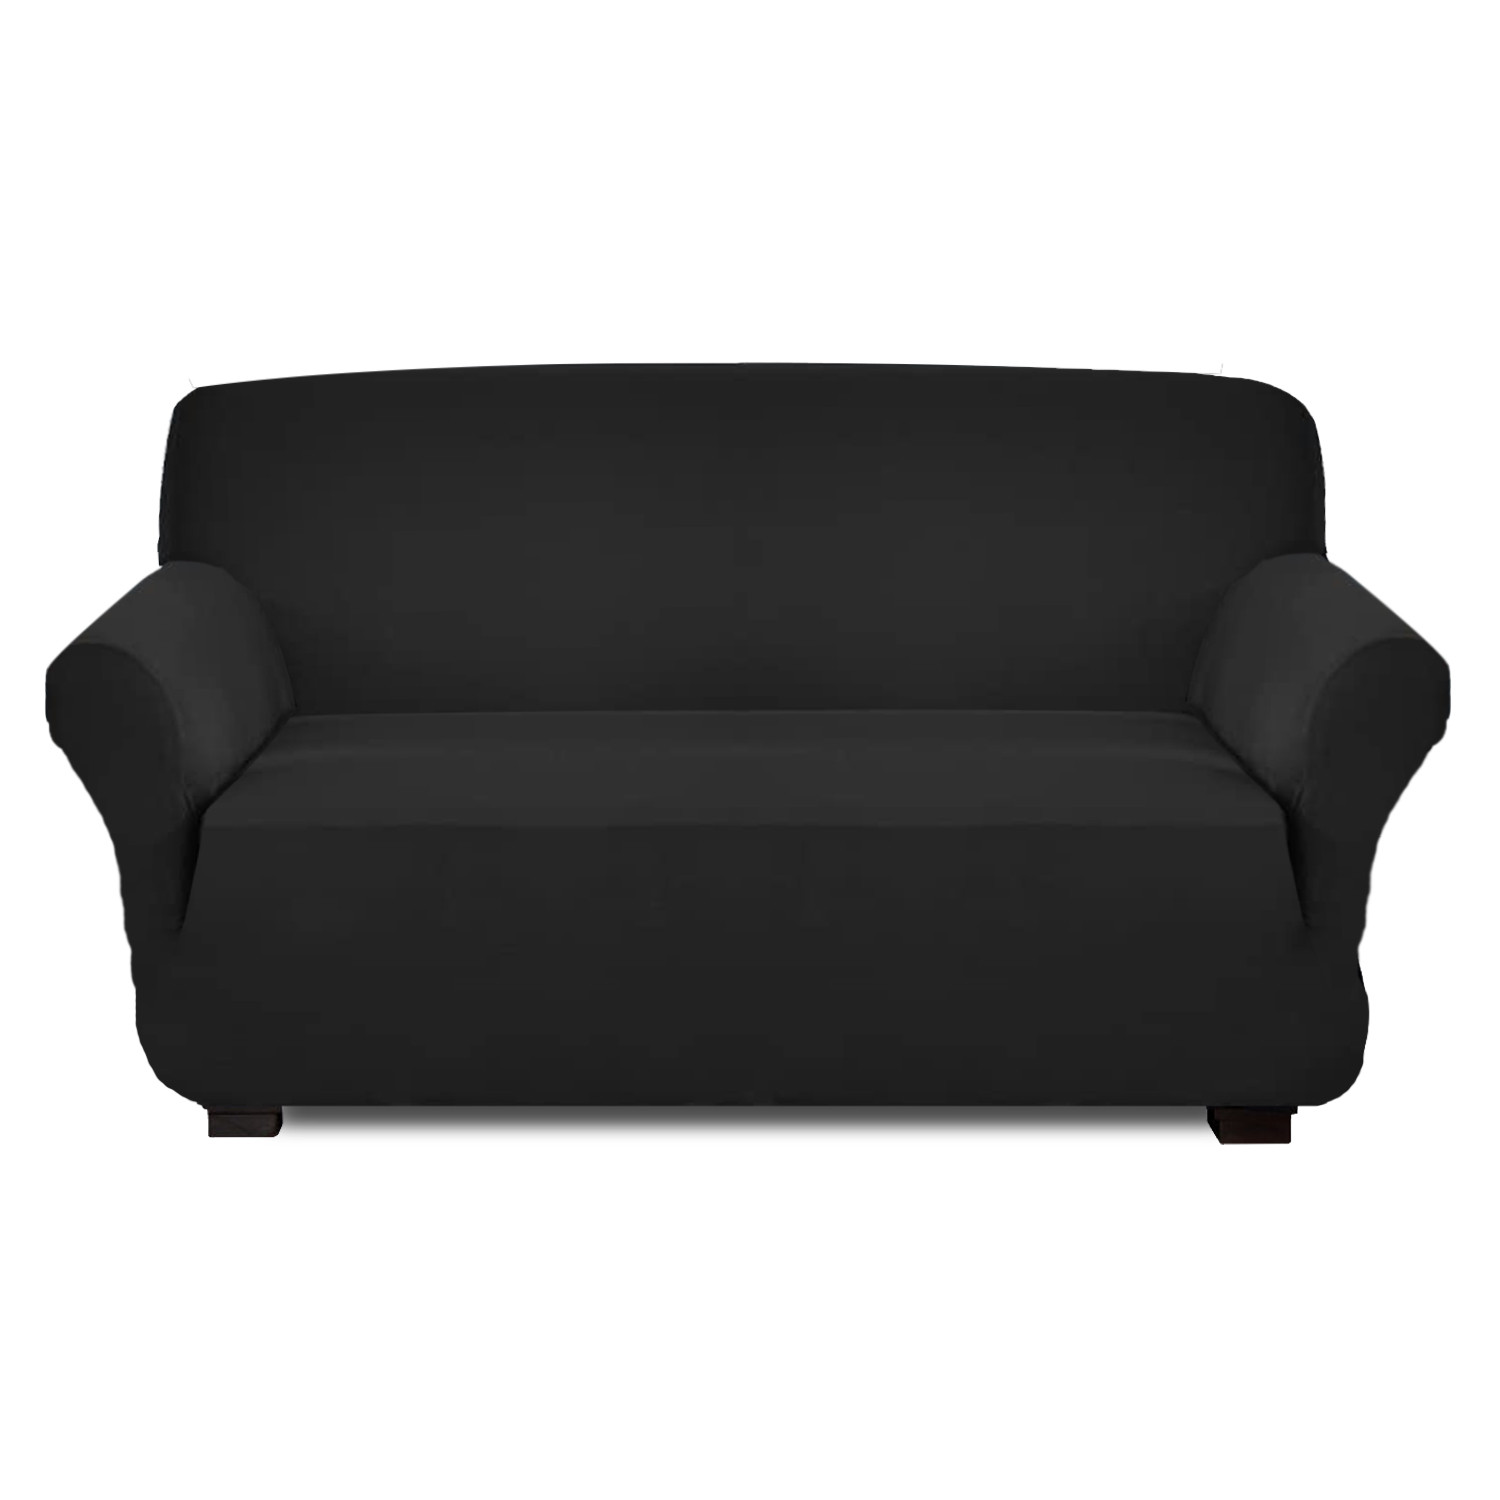 Kuber Industries Stretchable, Non-Slip Polyster 3 Seater Sofa Cover/Slipcover/Protector With Foam Stick (Black)